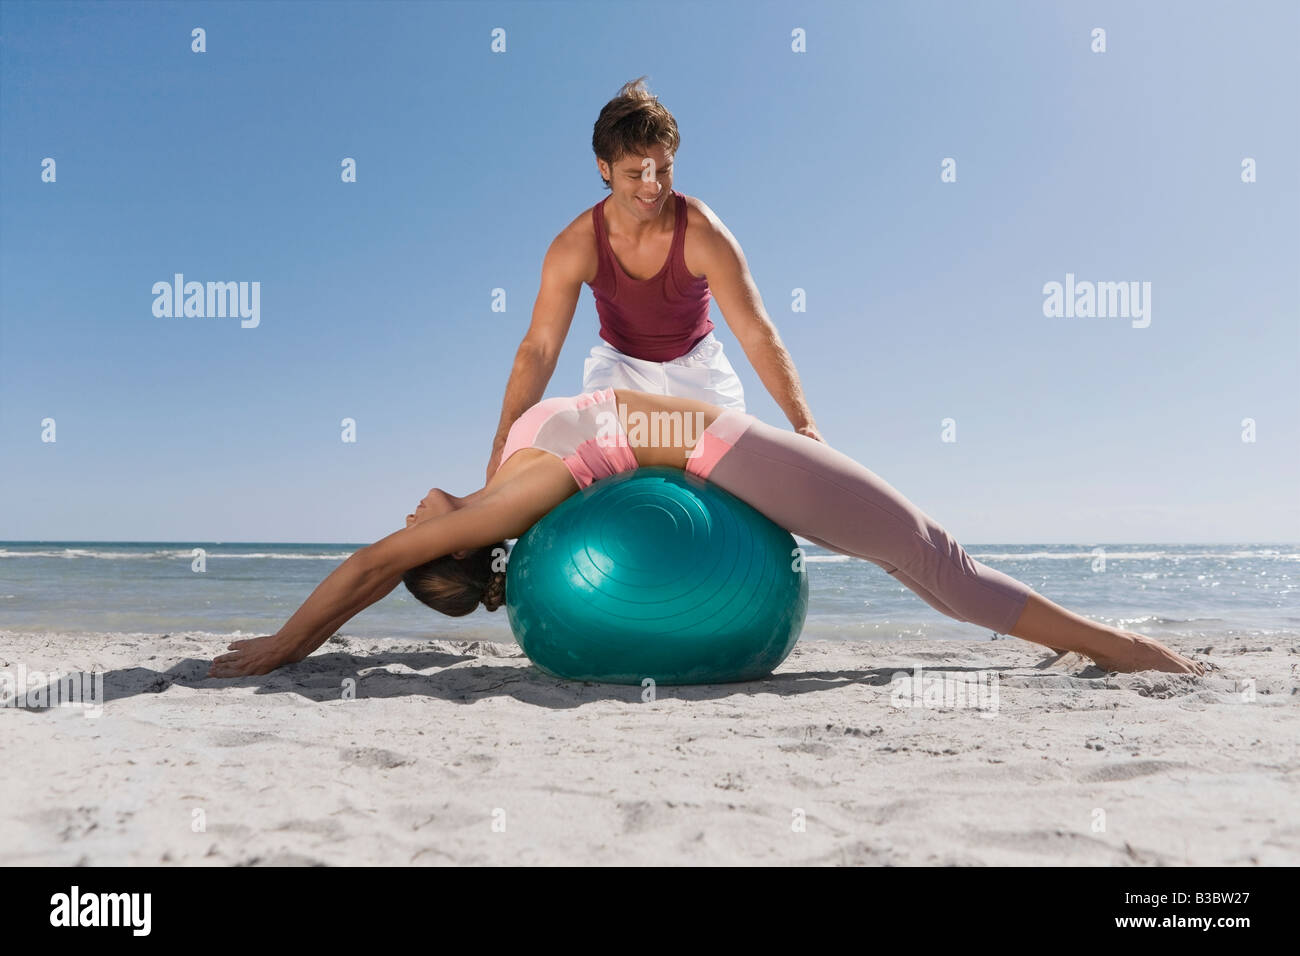 Hispanic trainer assisting woman on exercise ball Stock Photo